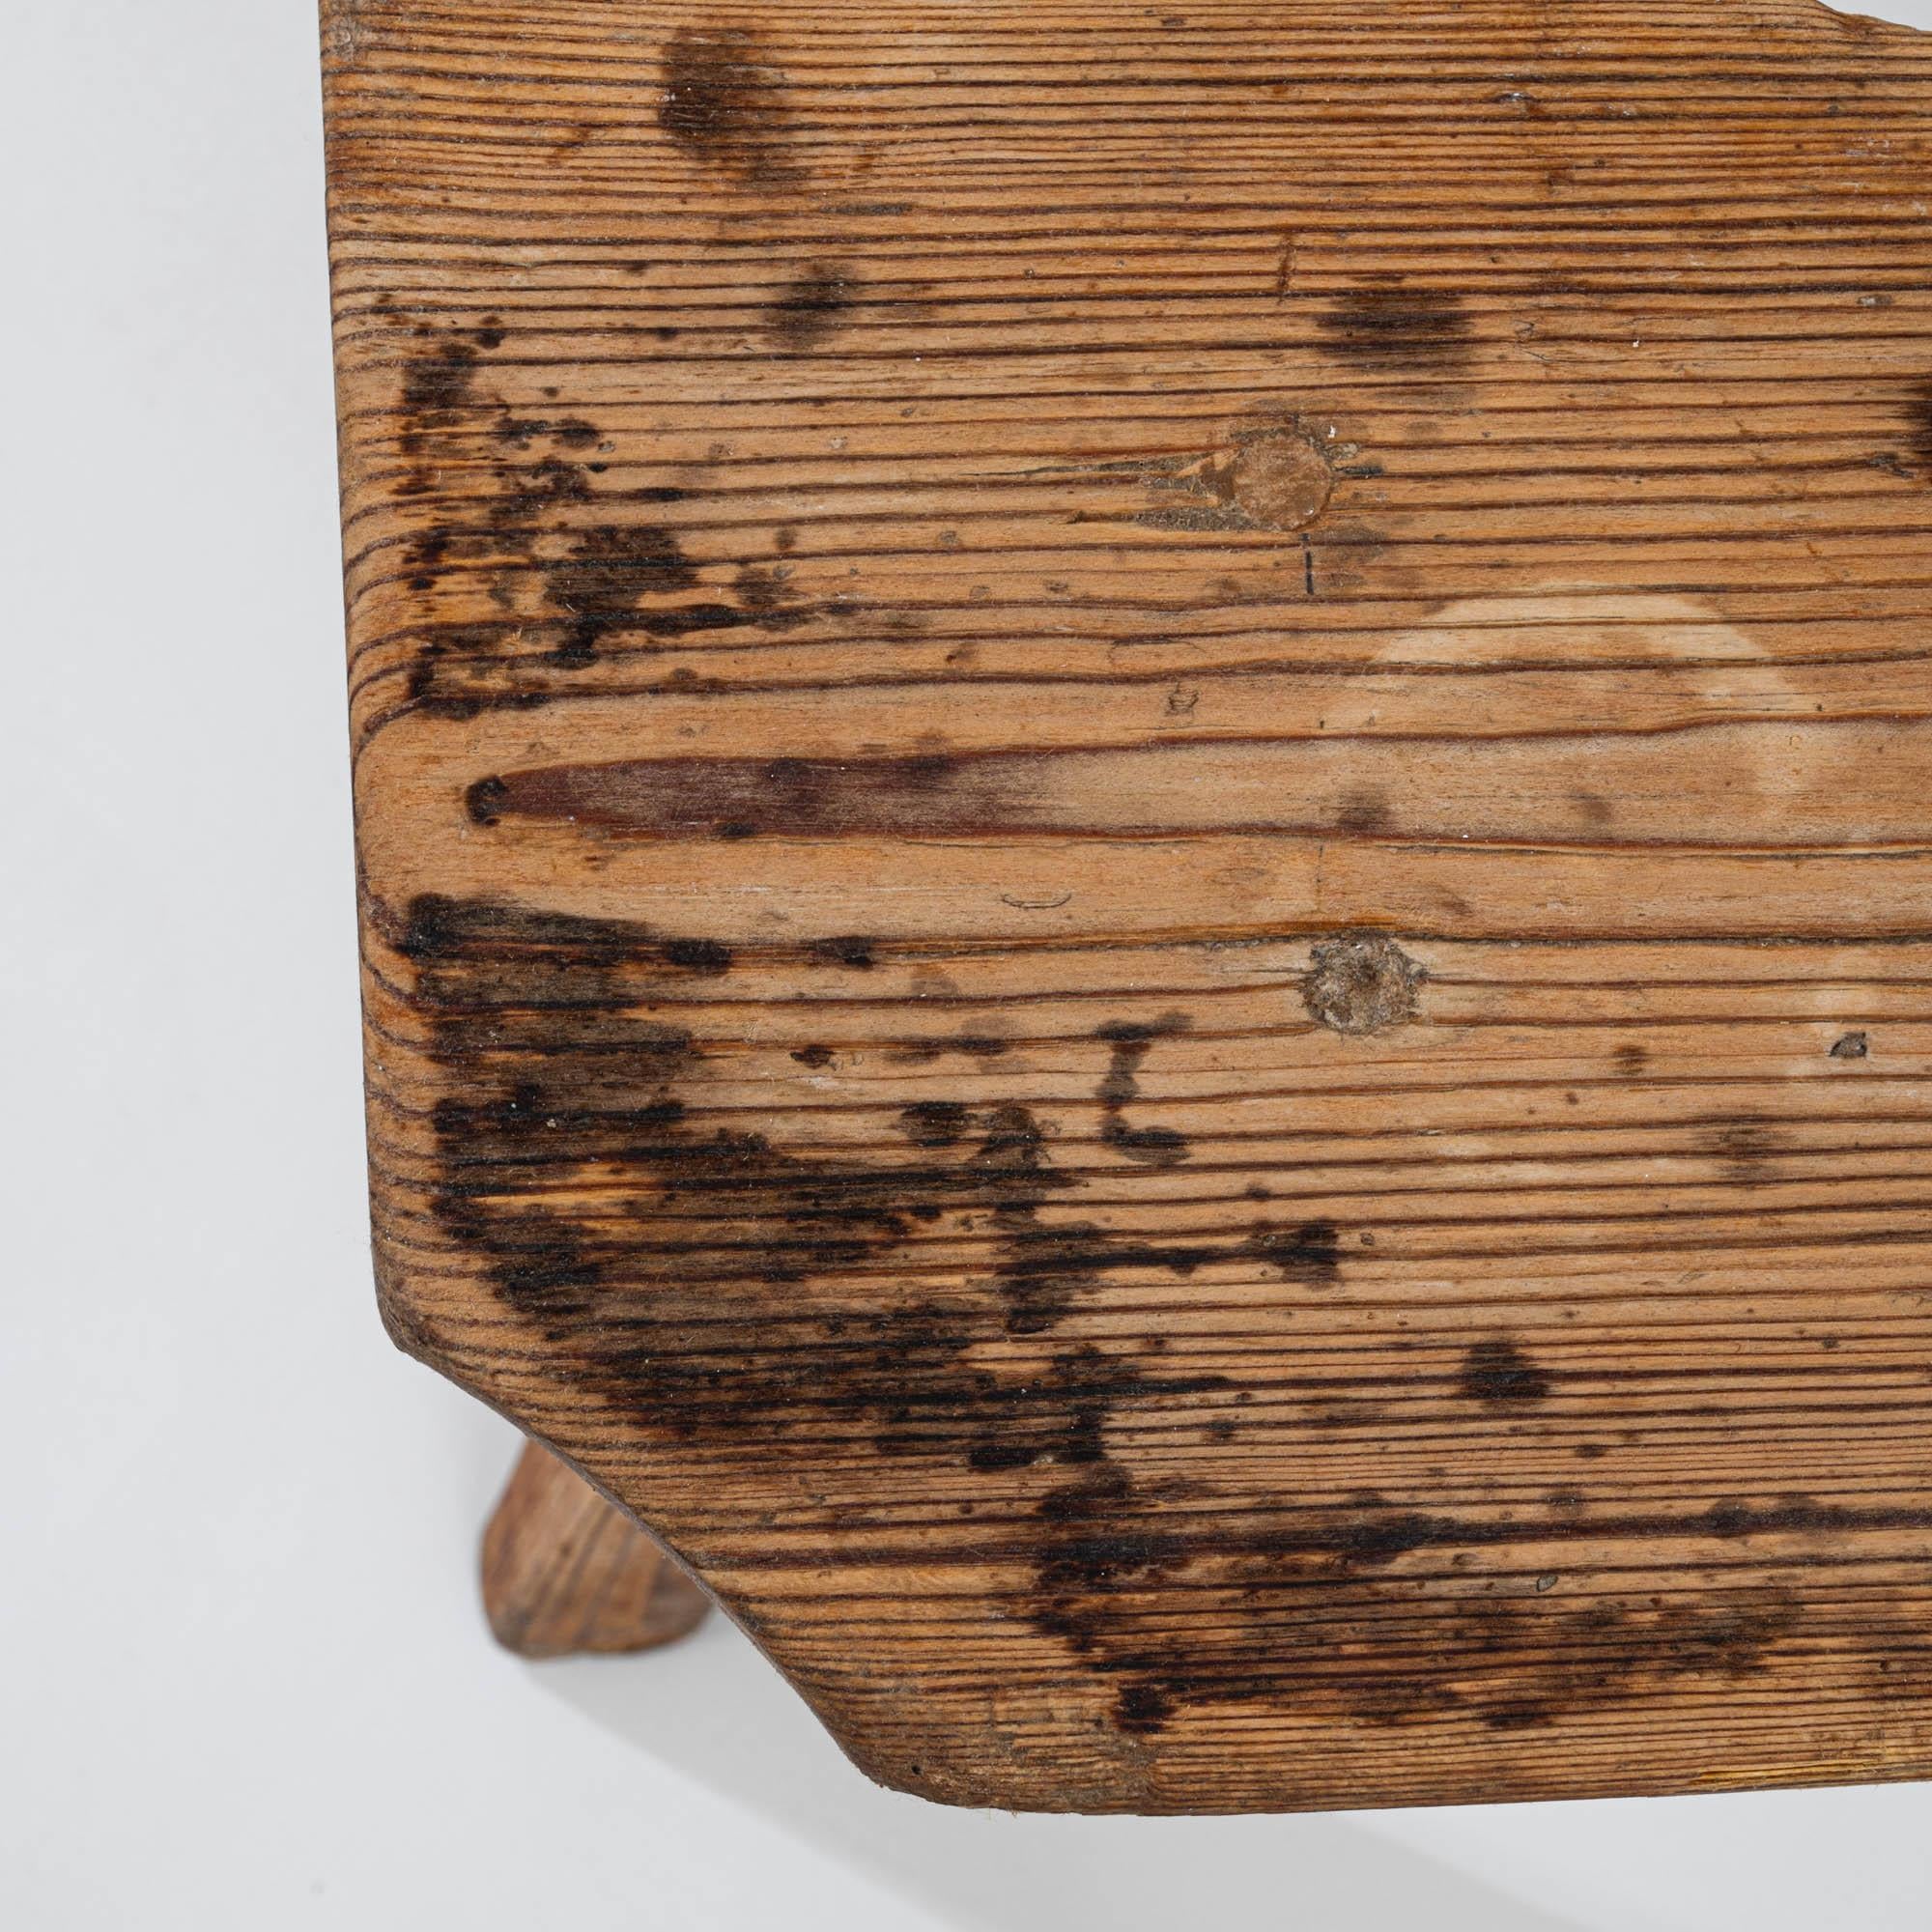 Early 20th Century French Wooden Stool 6